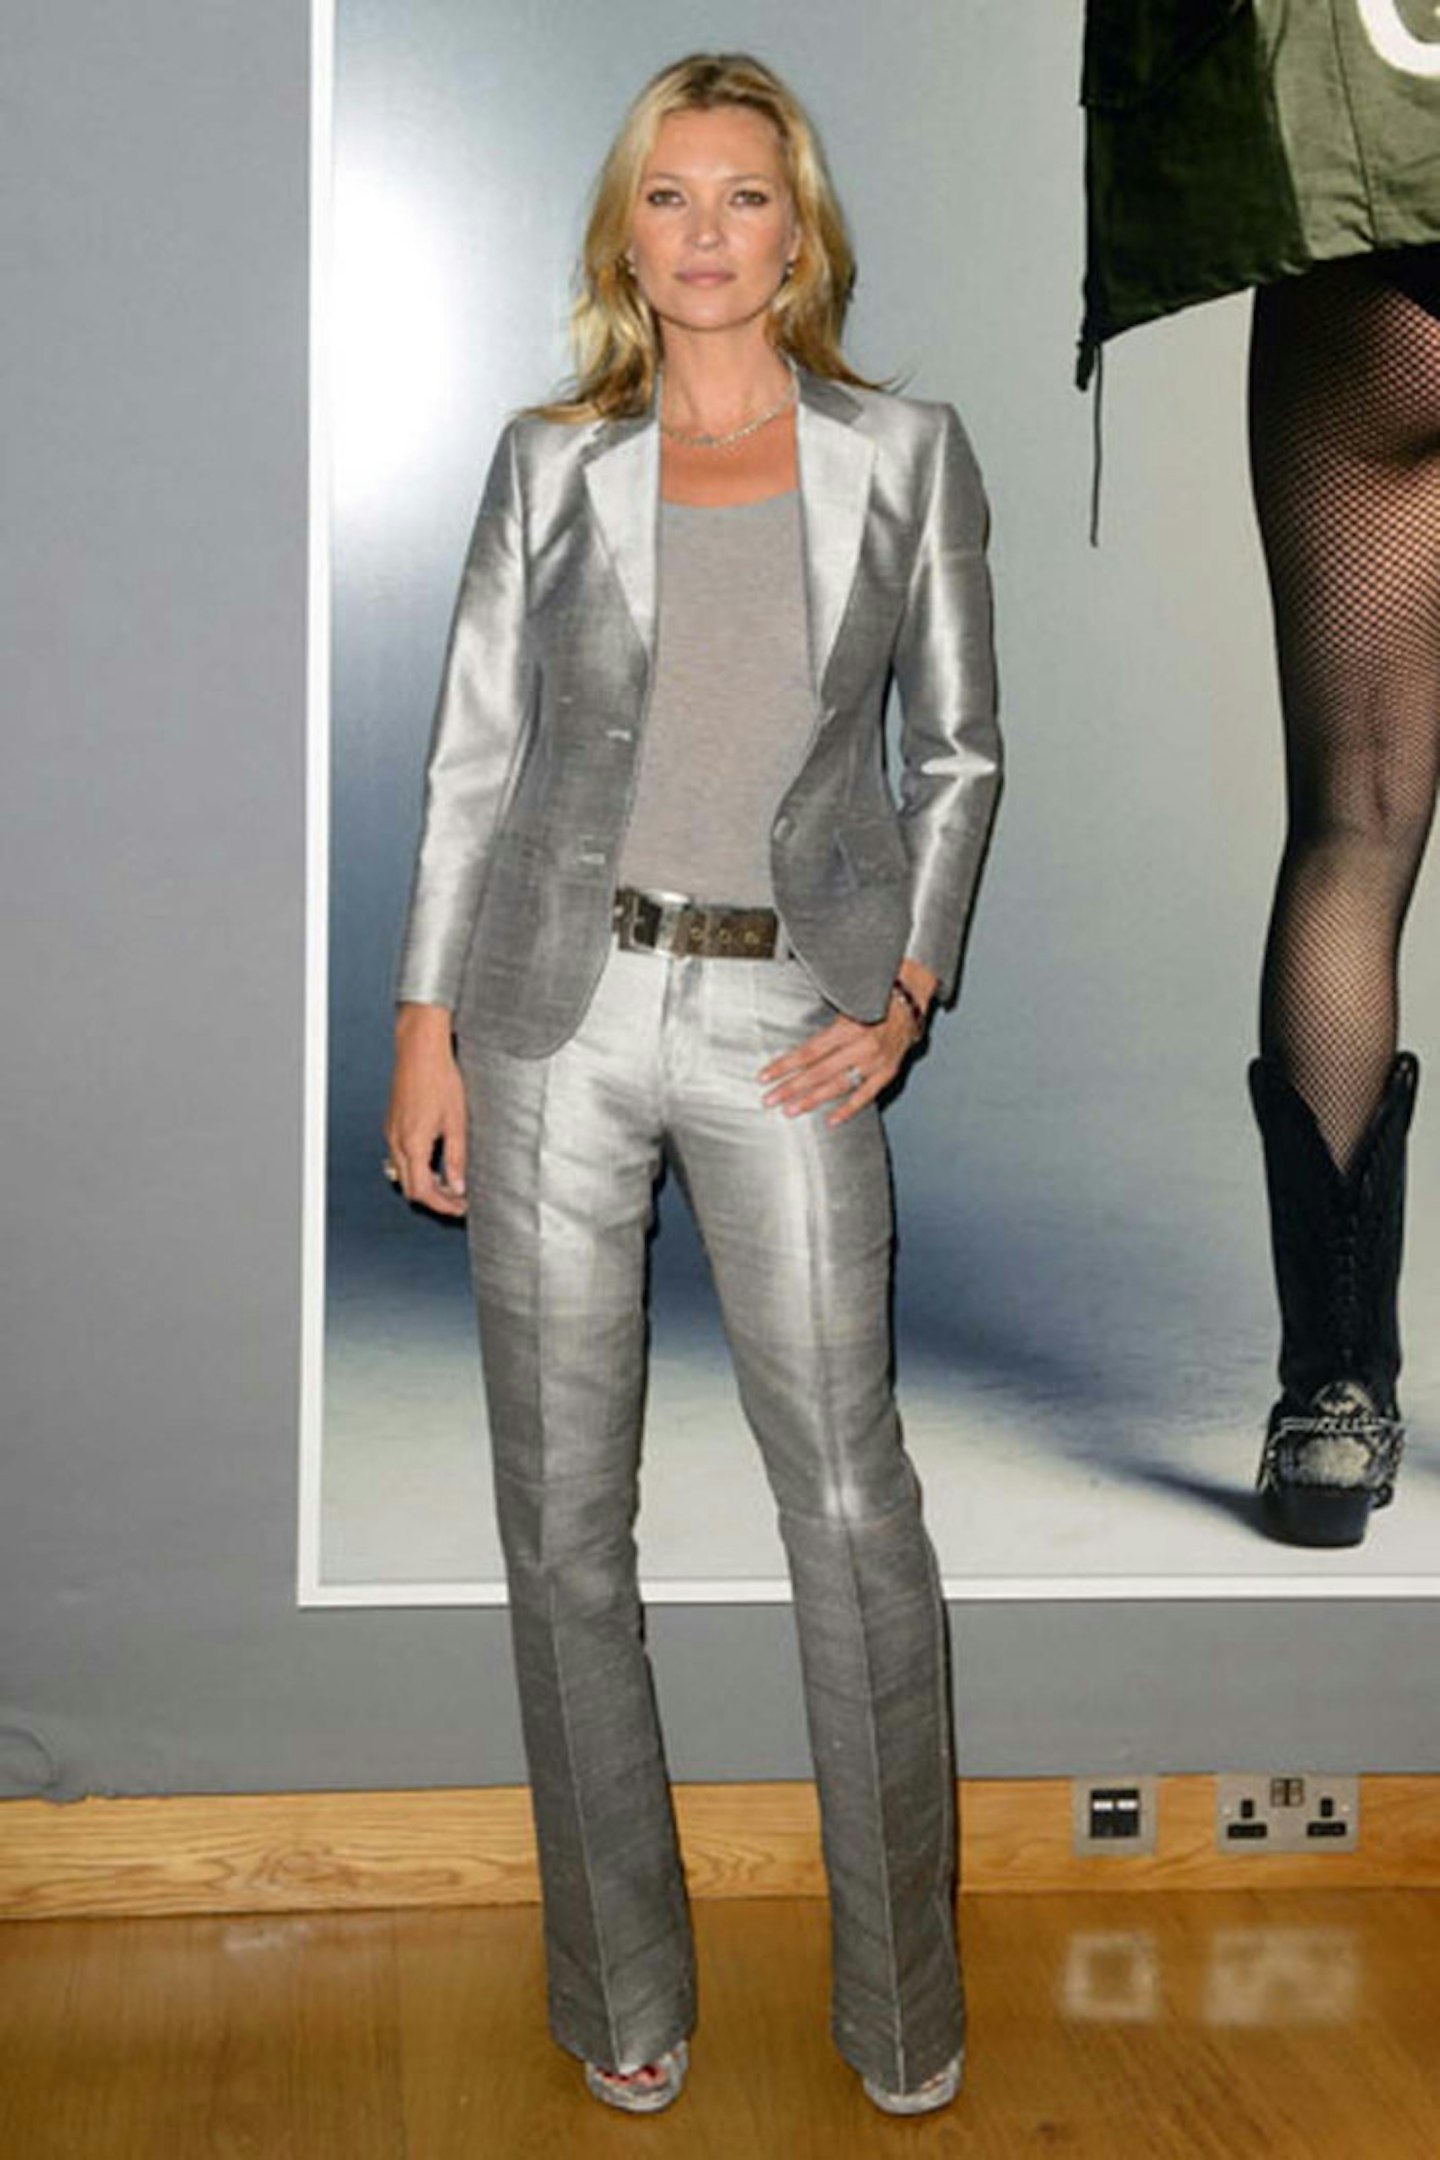 24-Kate Moss at Kate Moss The Collection Photocall in London - 4 September 2013